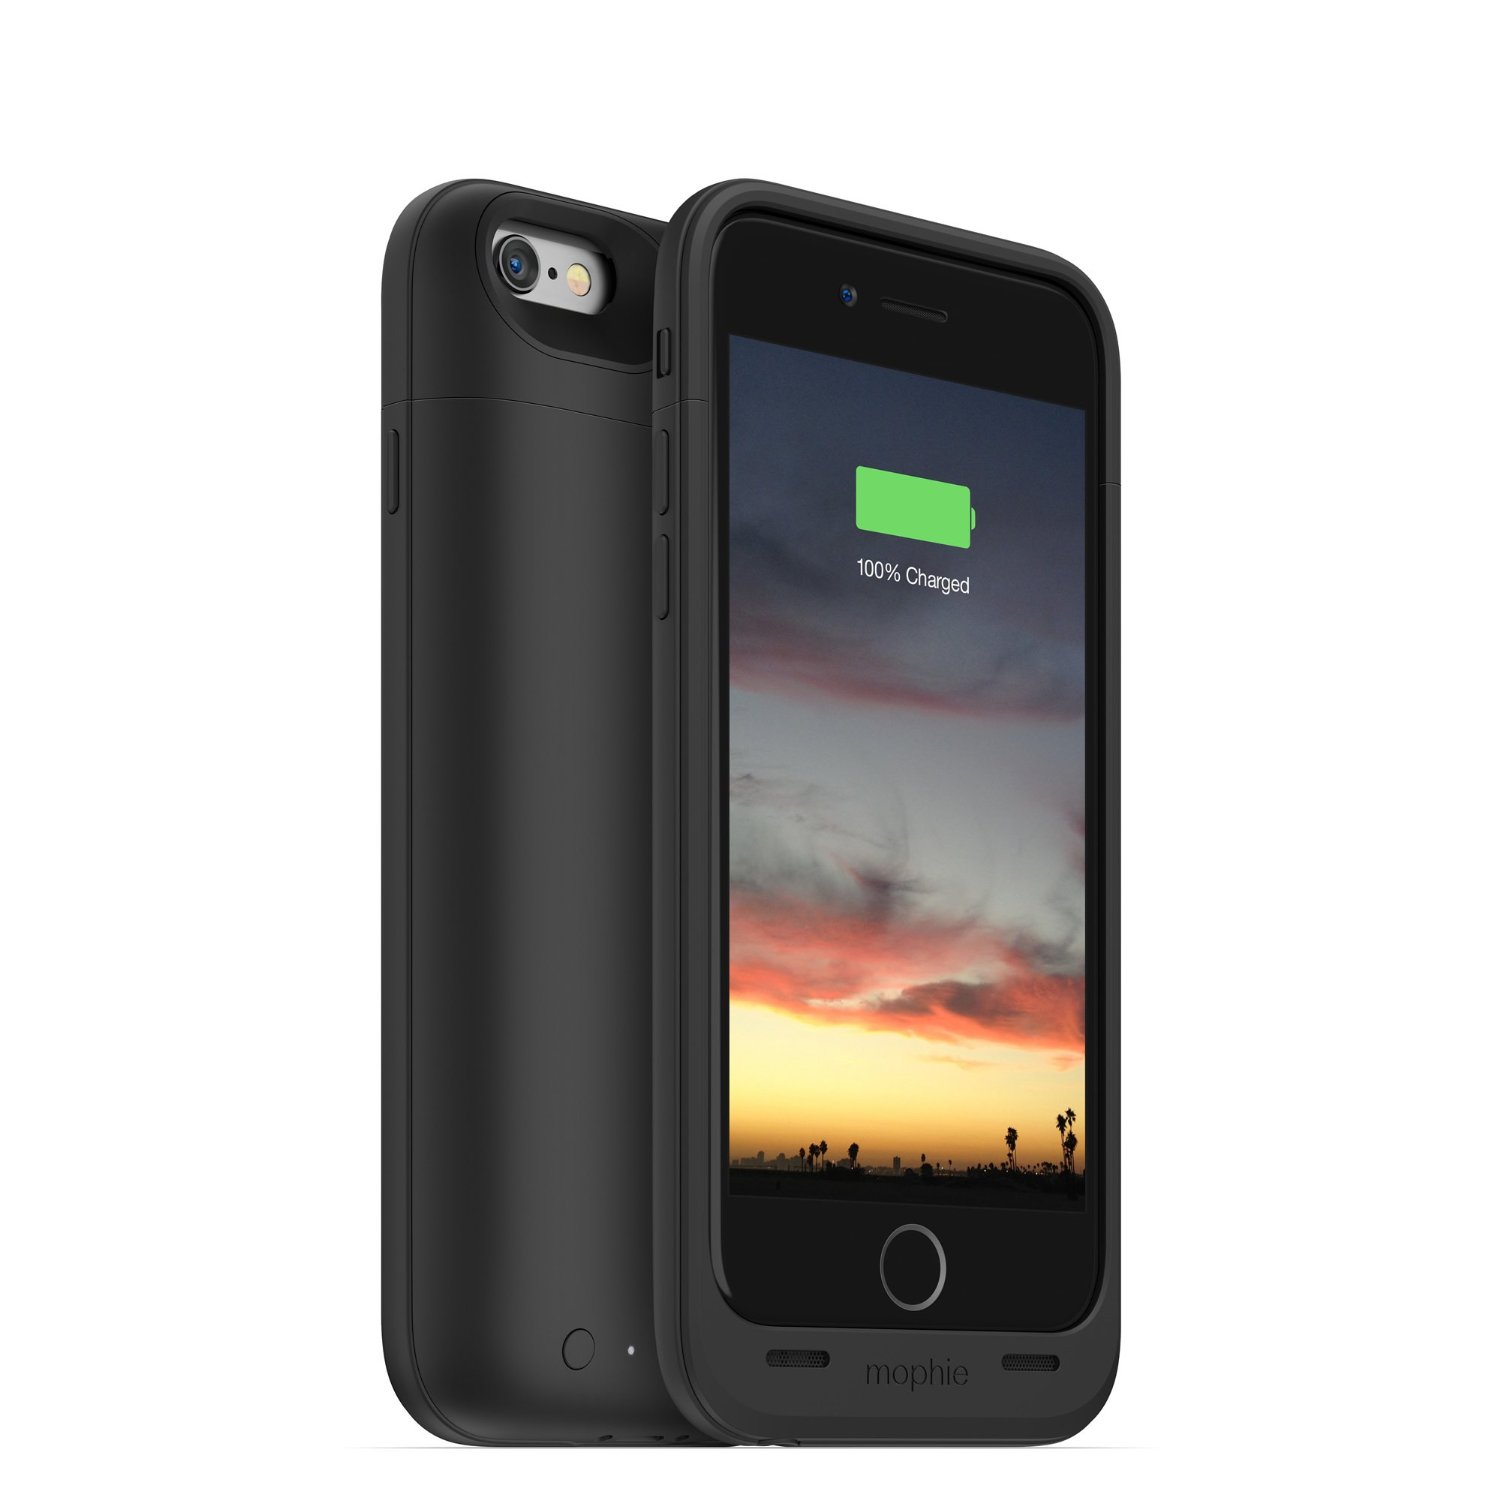 Mophie Juice Pack - Best iPhone 6 cases